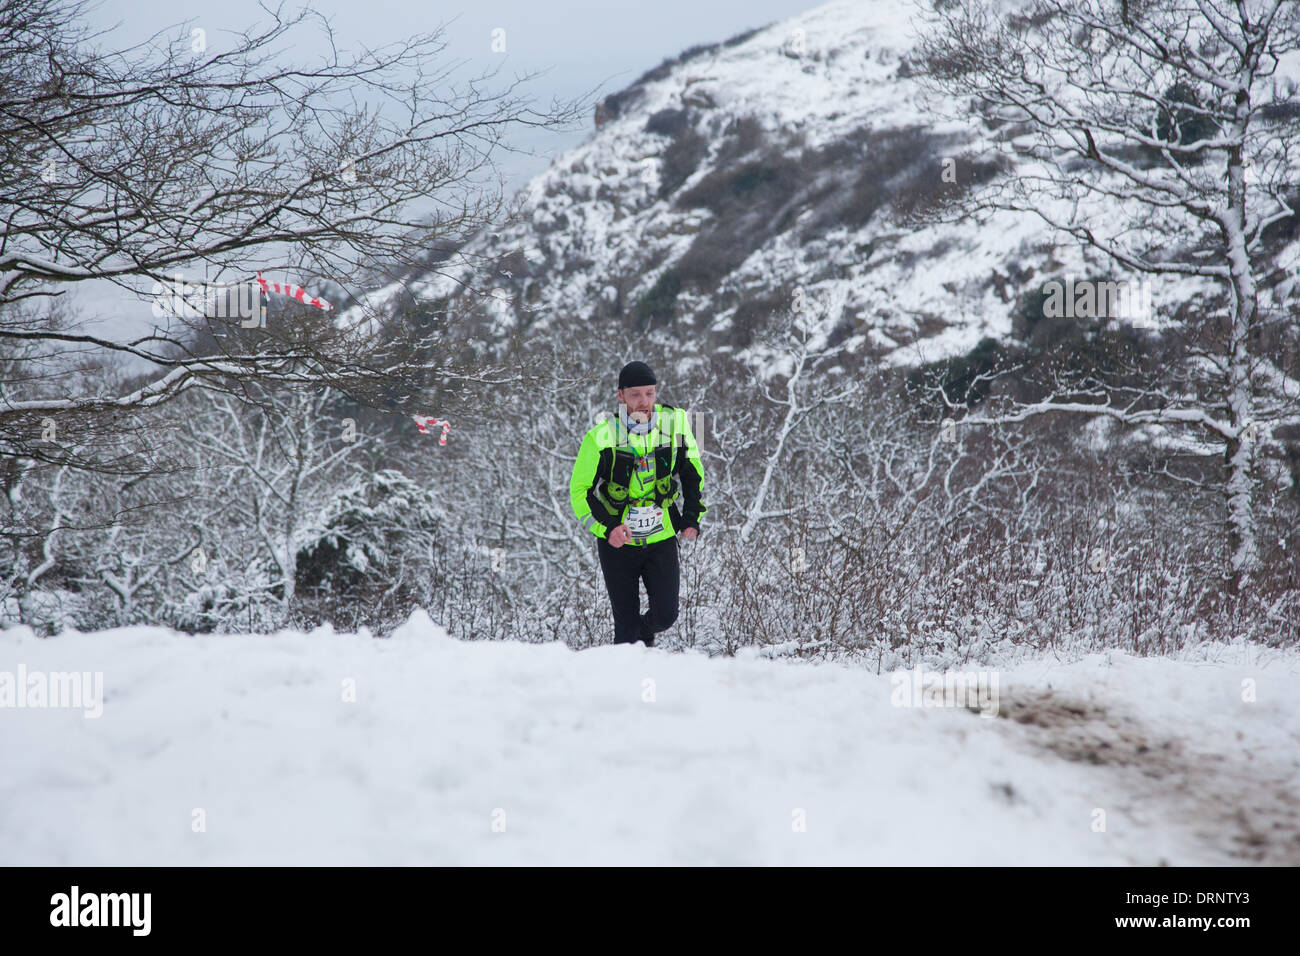 A runner makes his way up a snowy hill on a trail leading from a ...